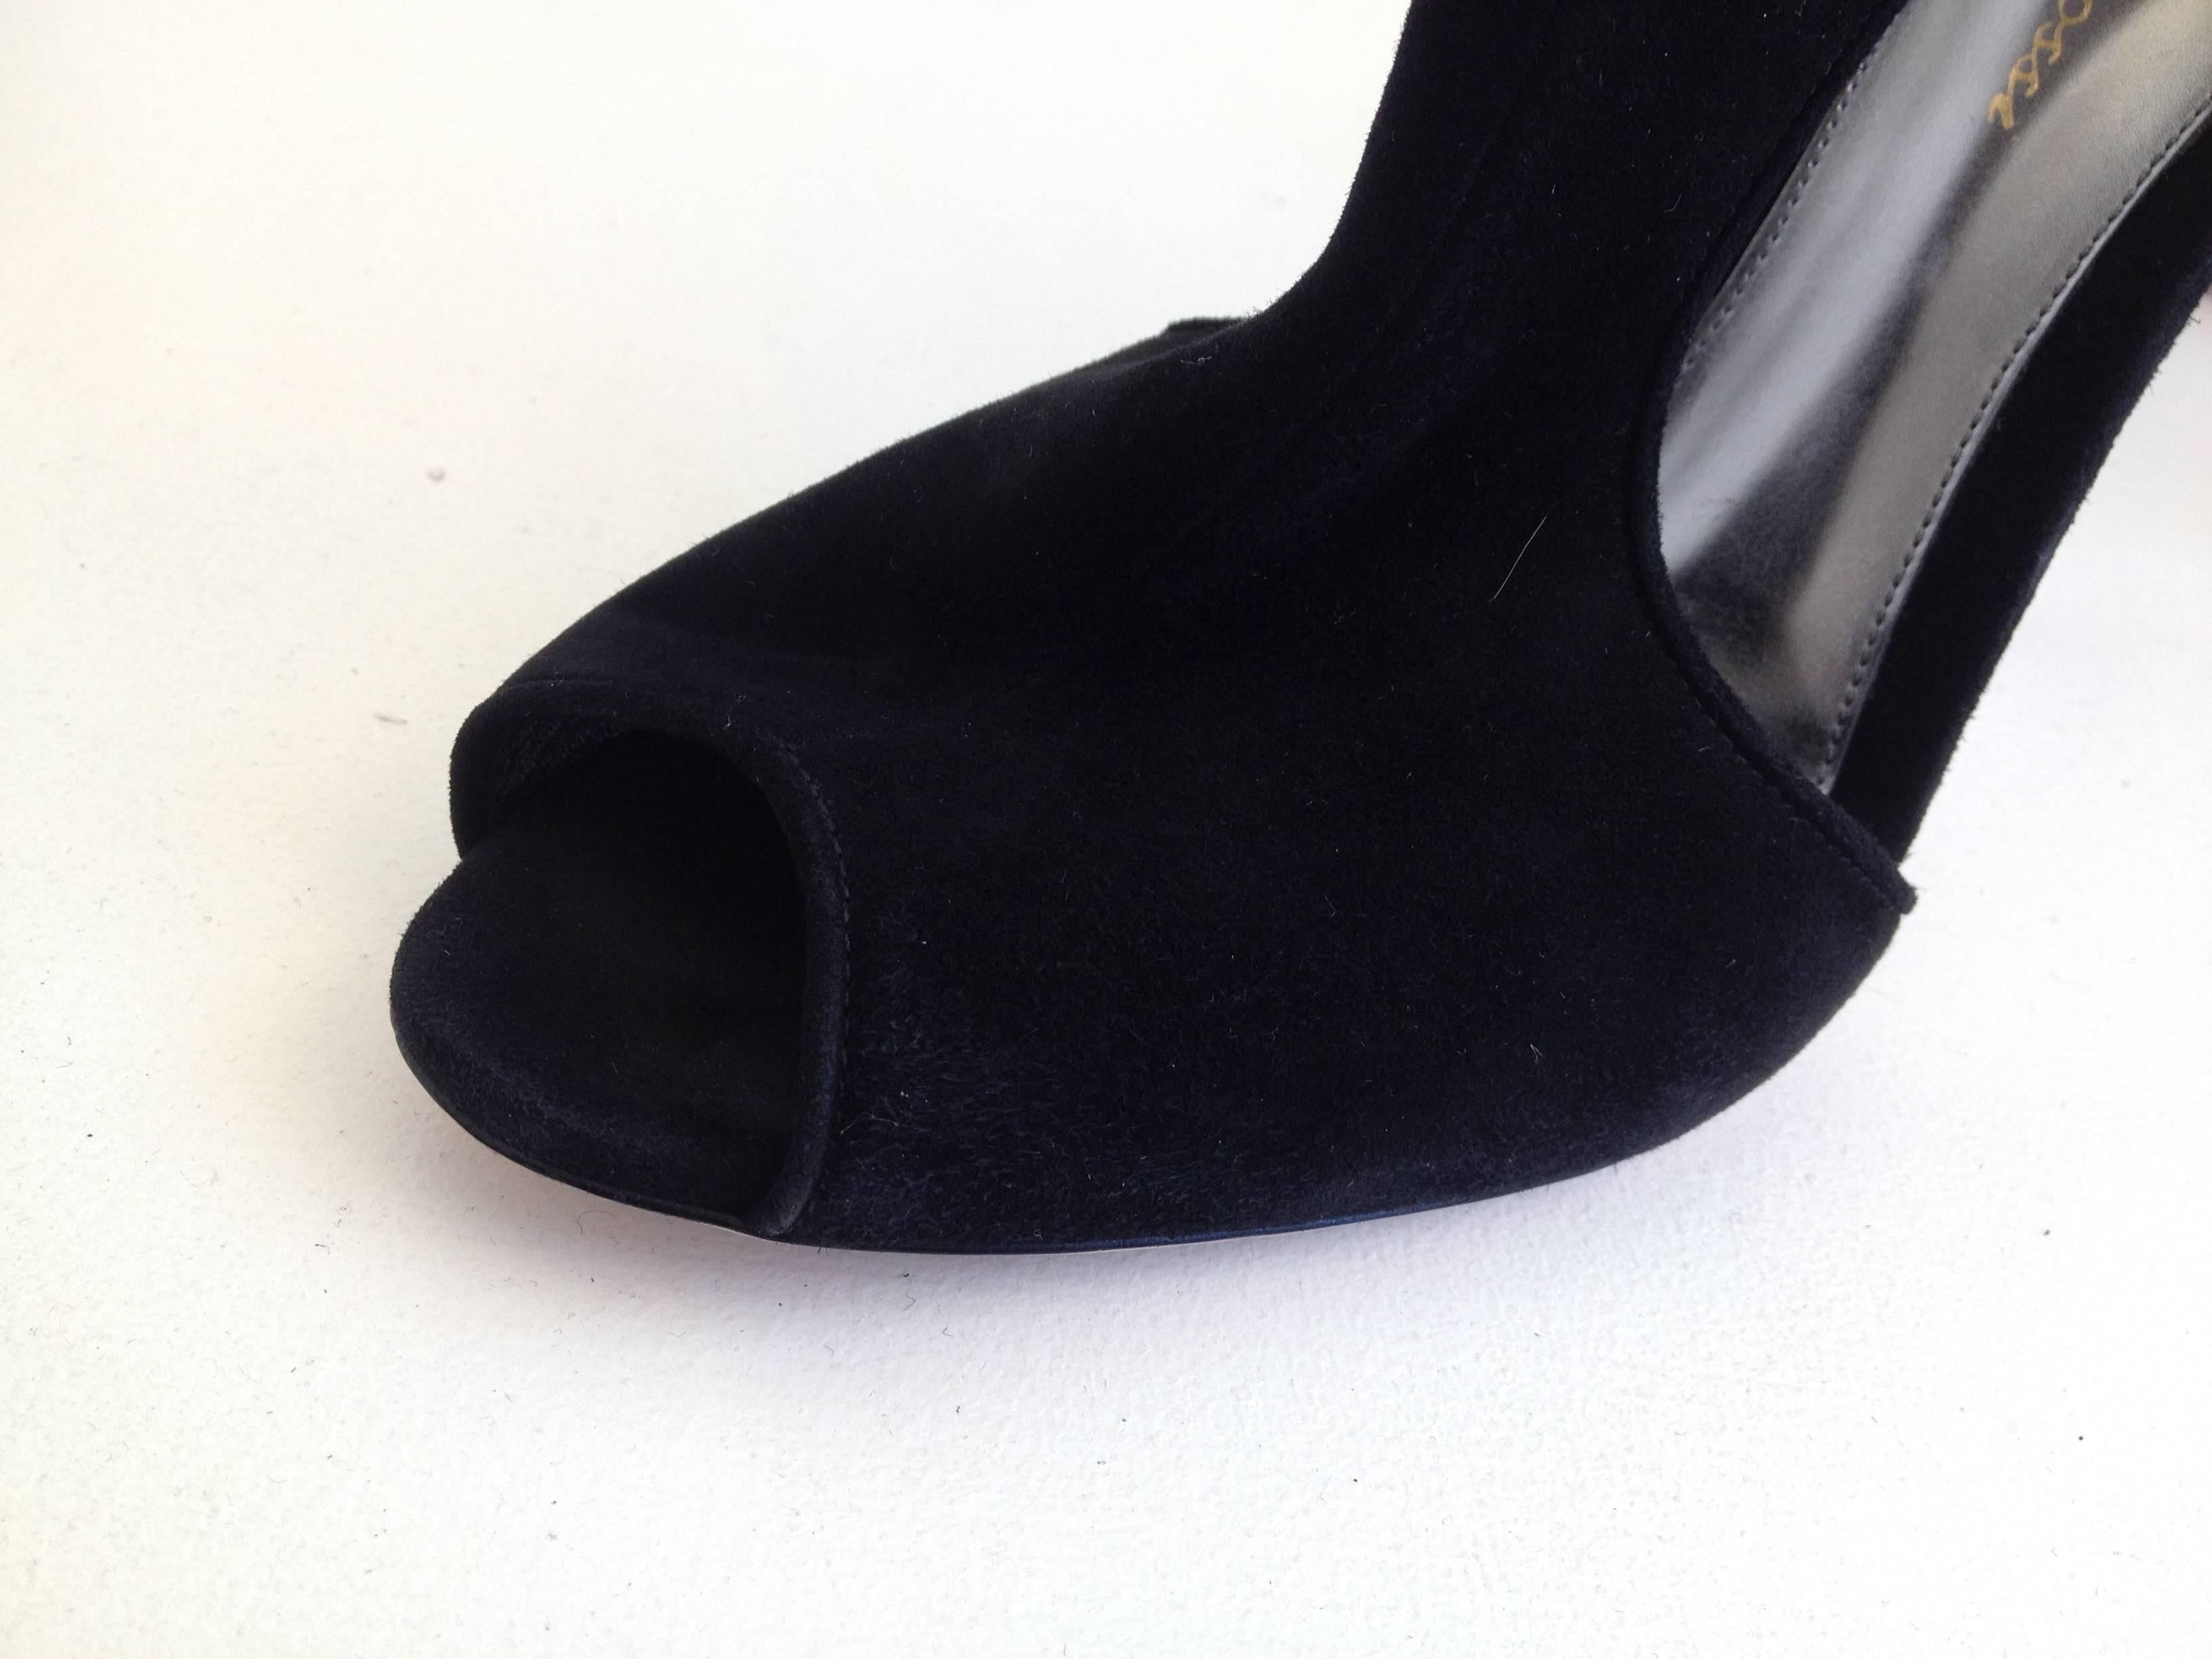 Women's Gianvito Rossi Black Suede Cutout Heels Size 39 (8.5) For Sale